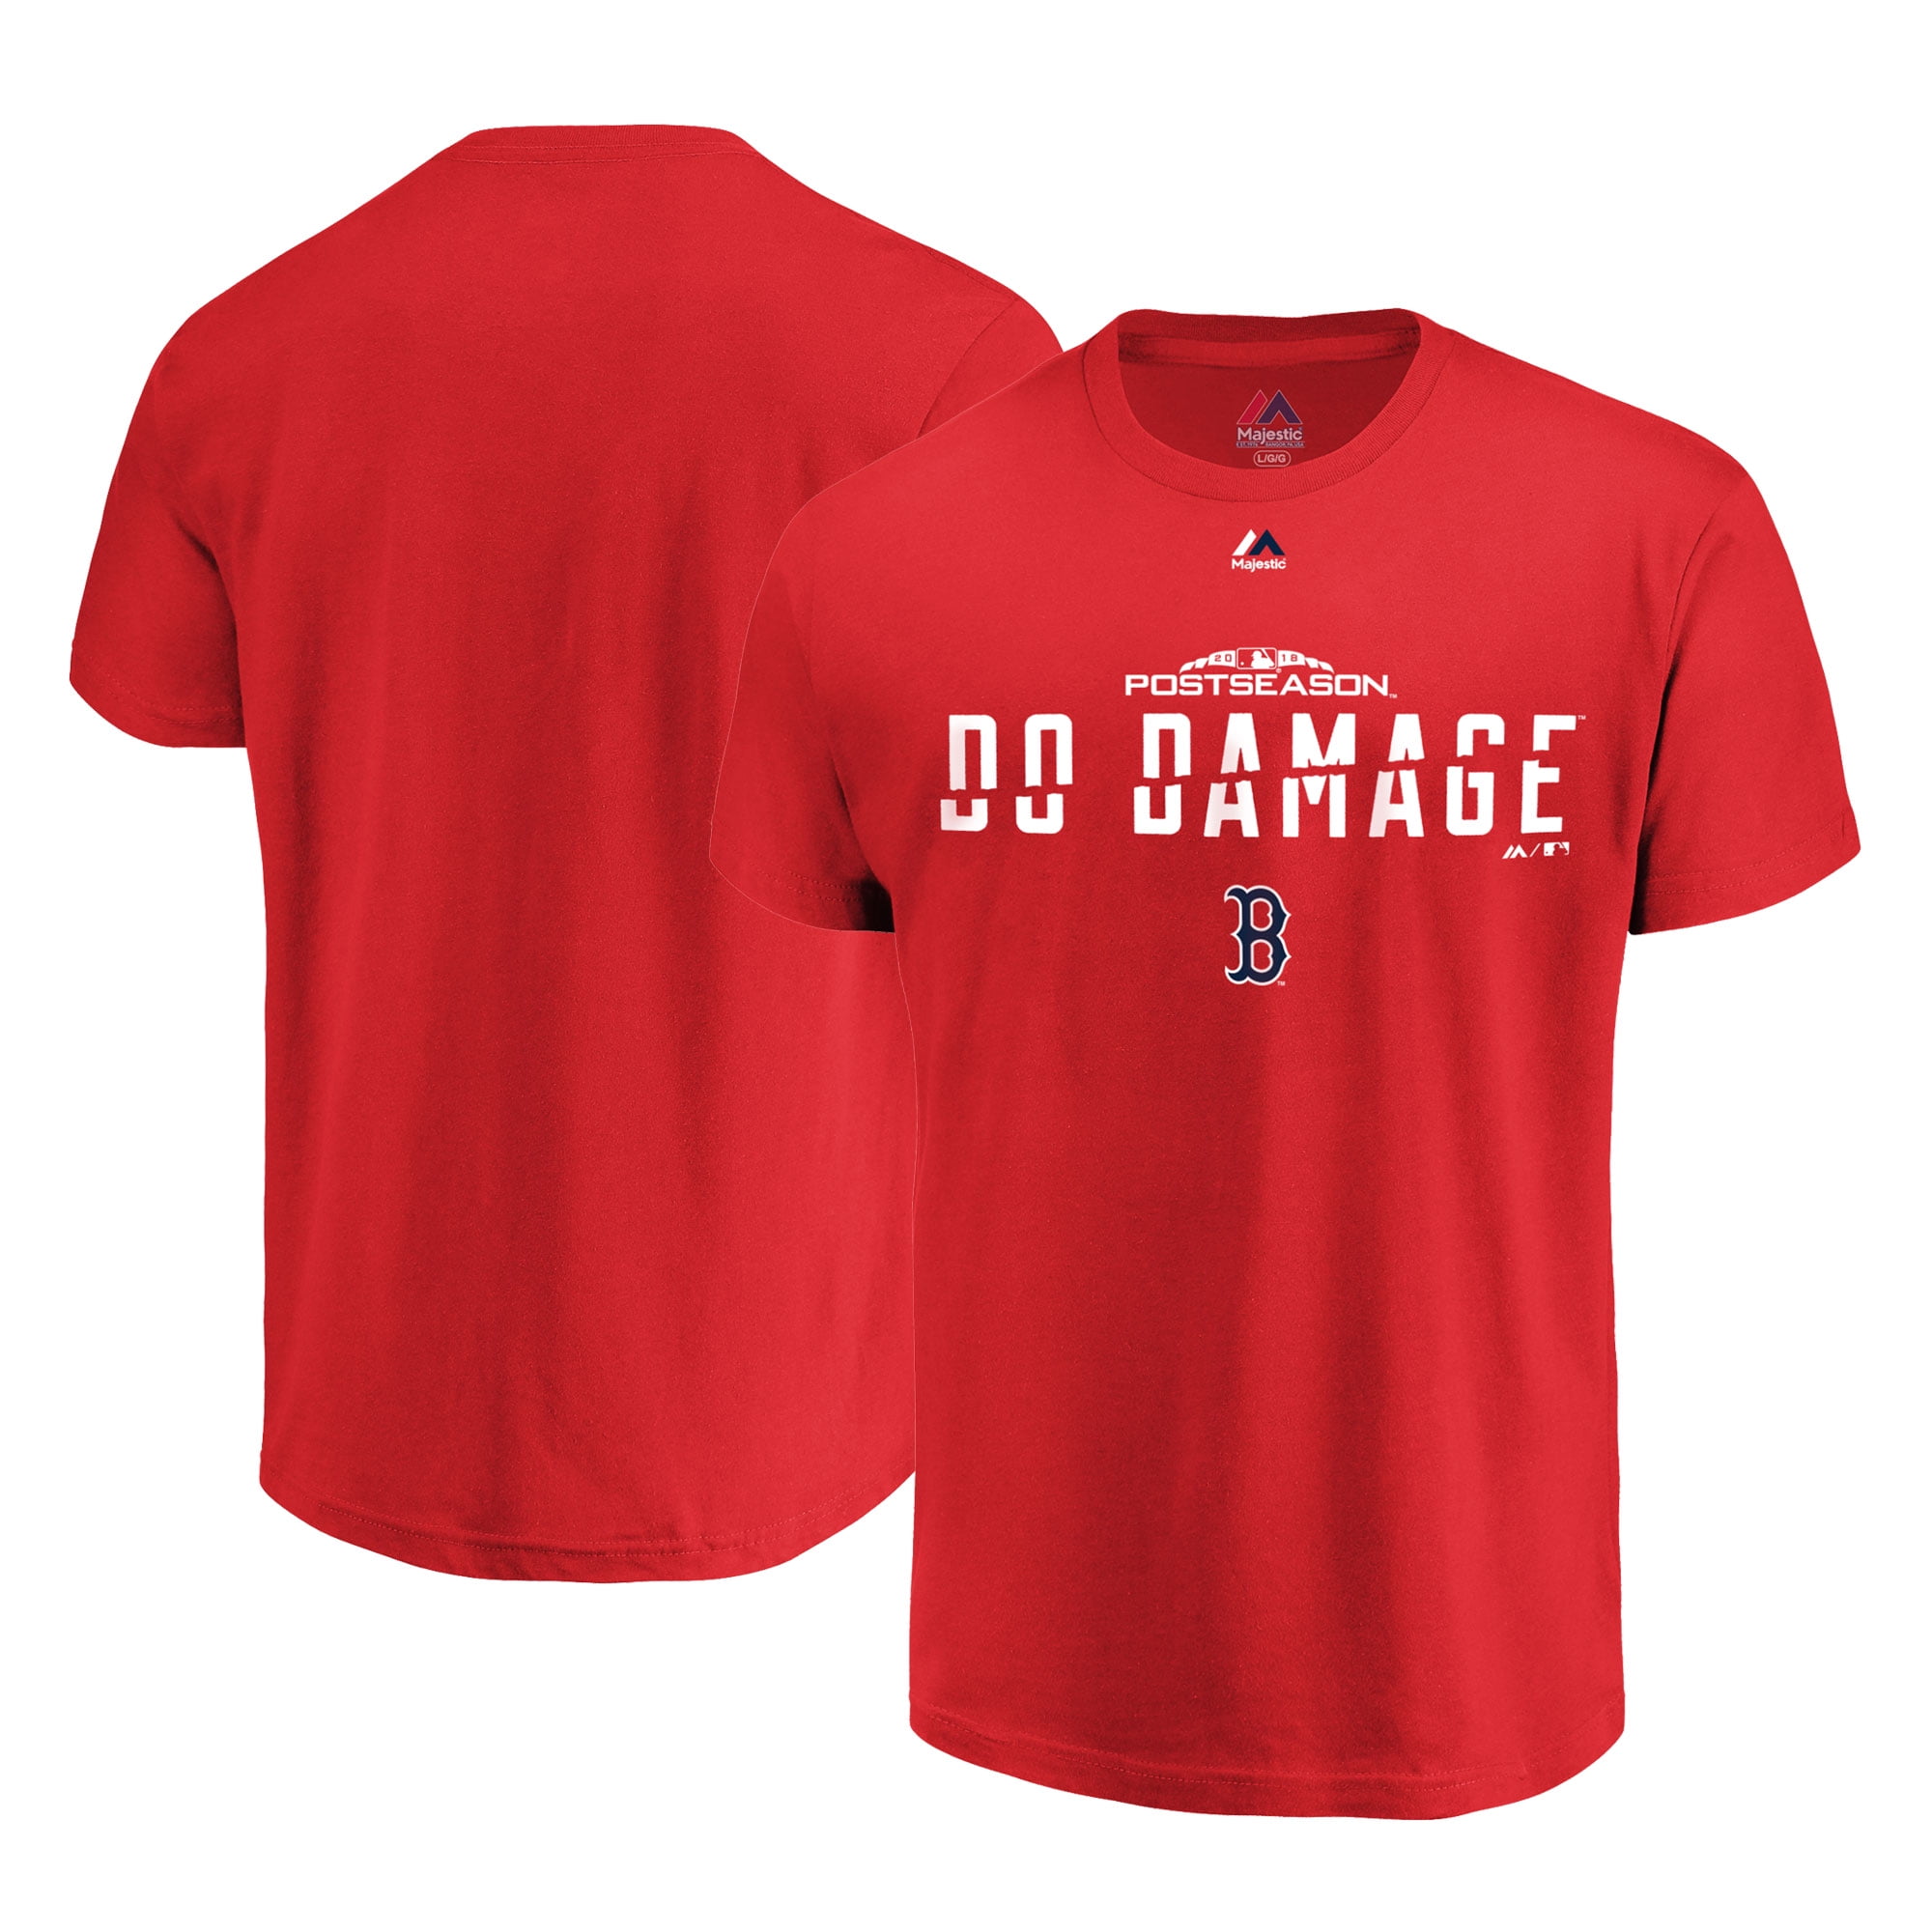 damage done red sox t shirt